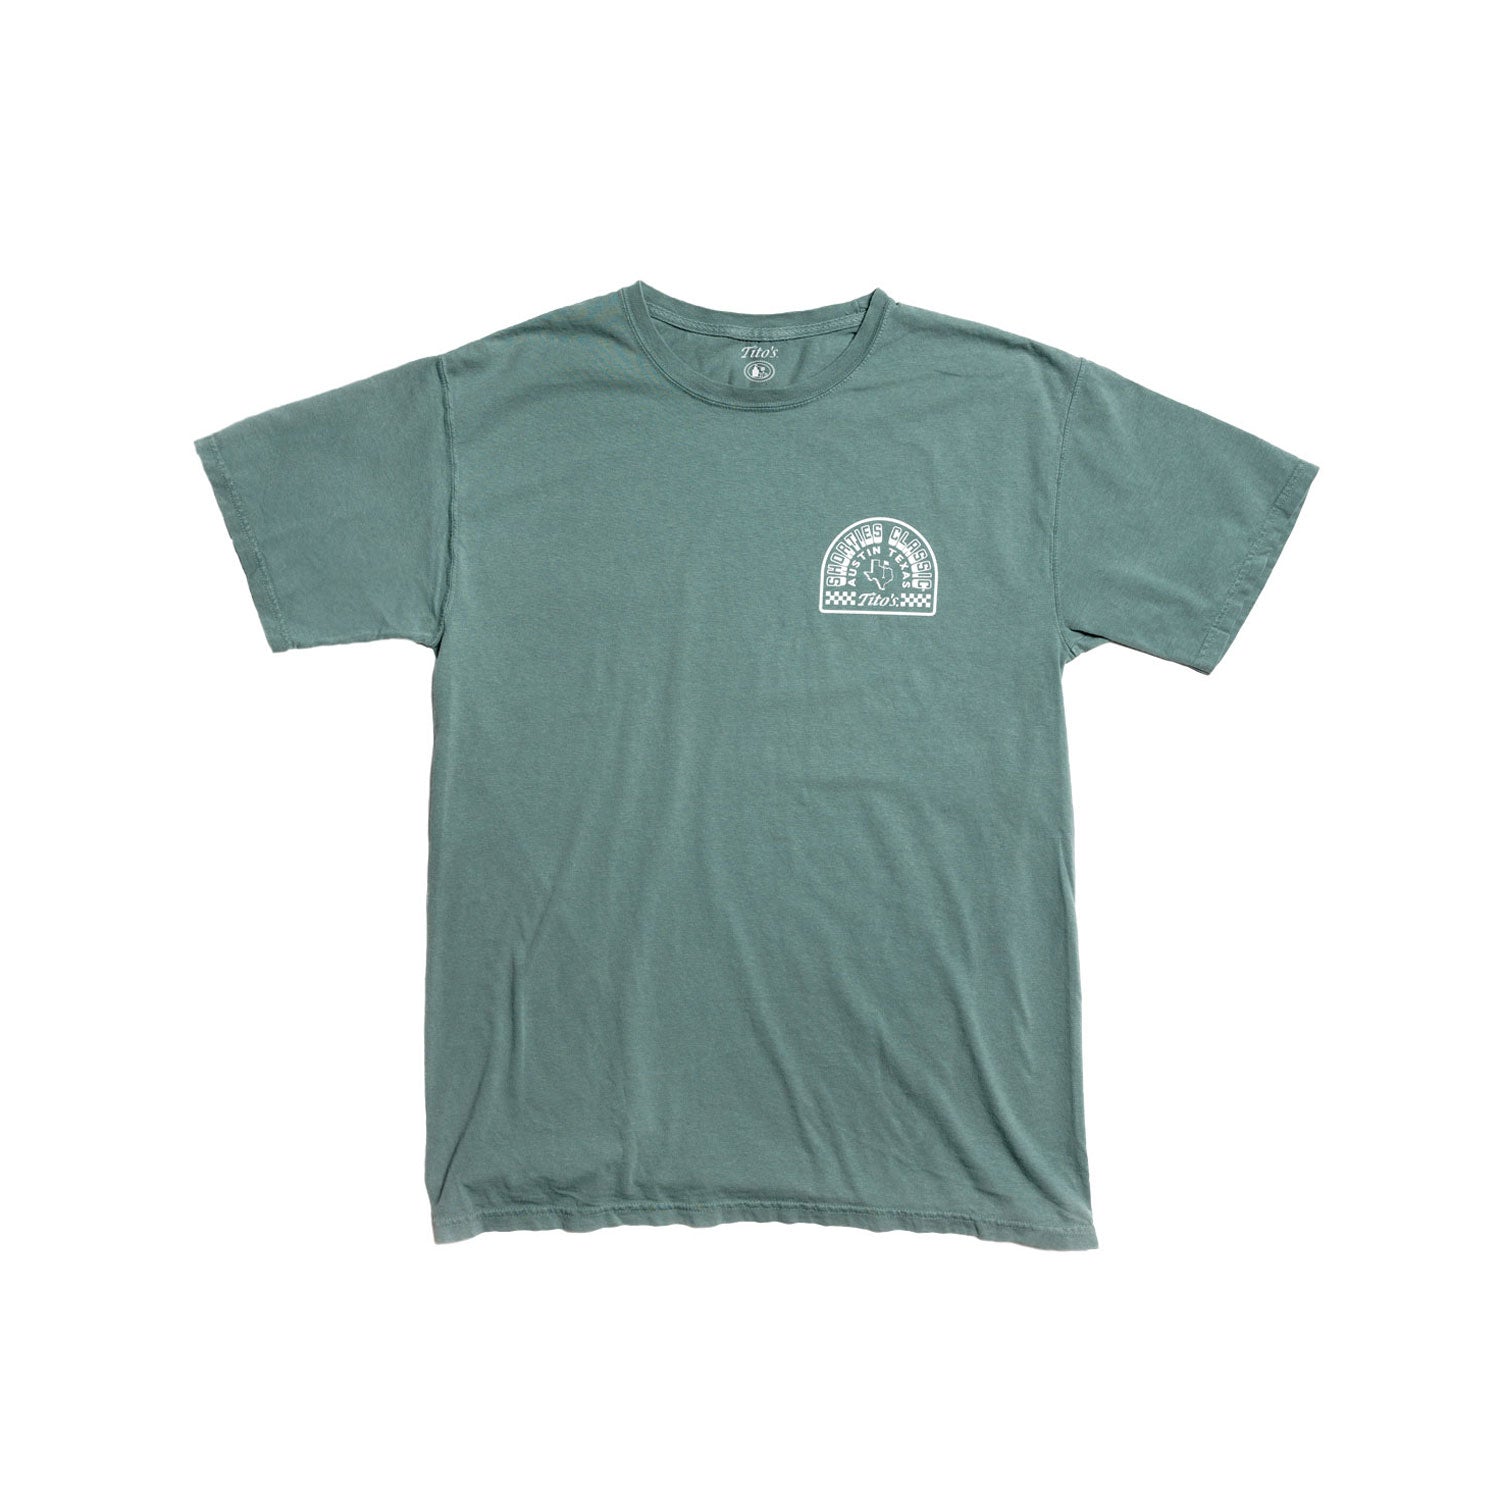 Front of sage green t-shirt with Shorties Classic, Austin, Texas, and Tito's design